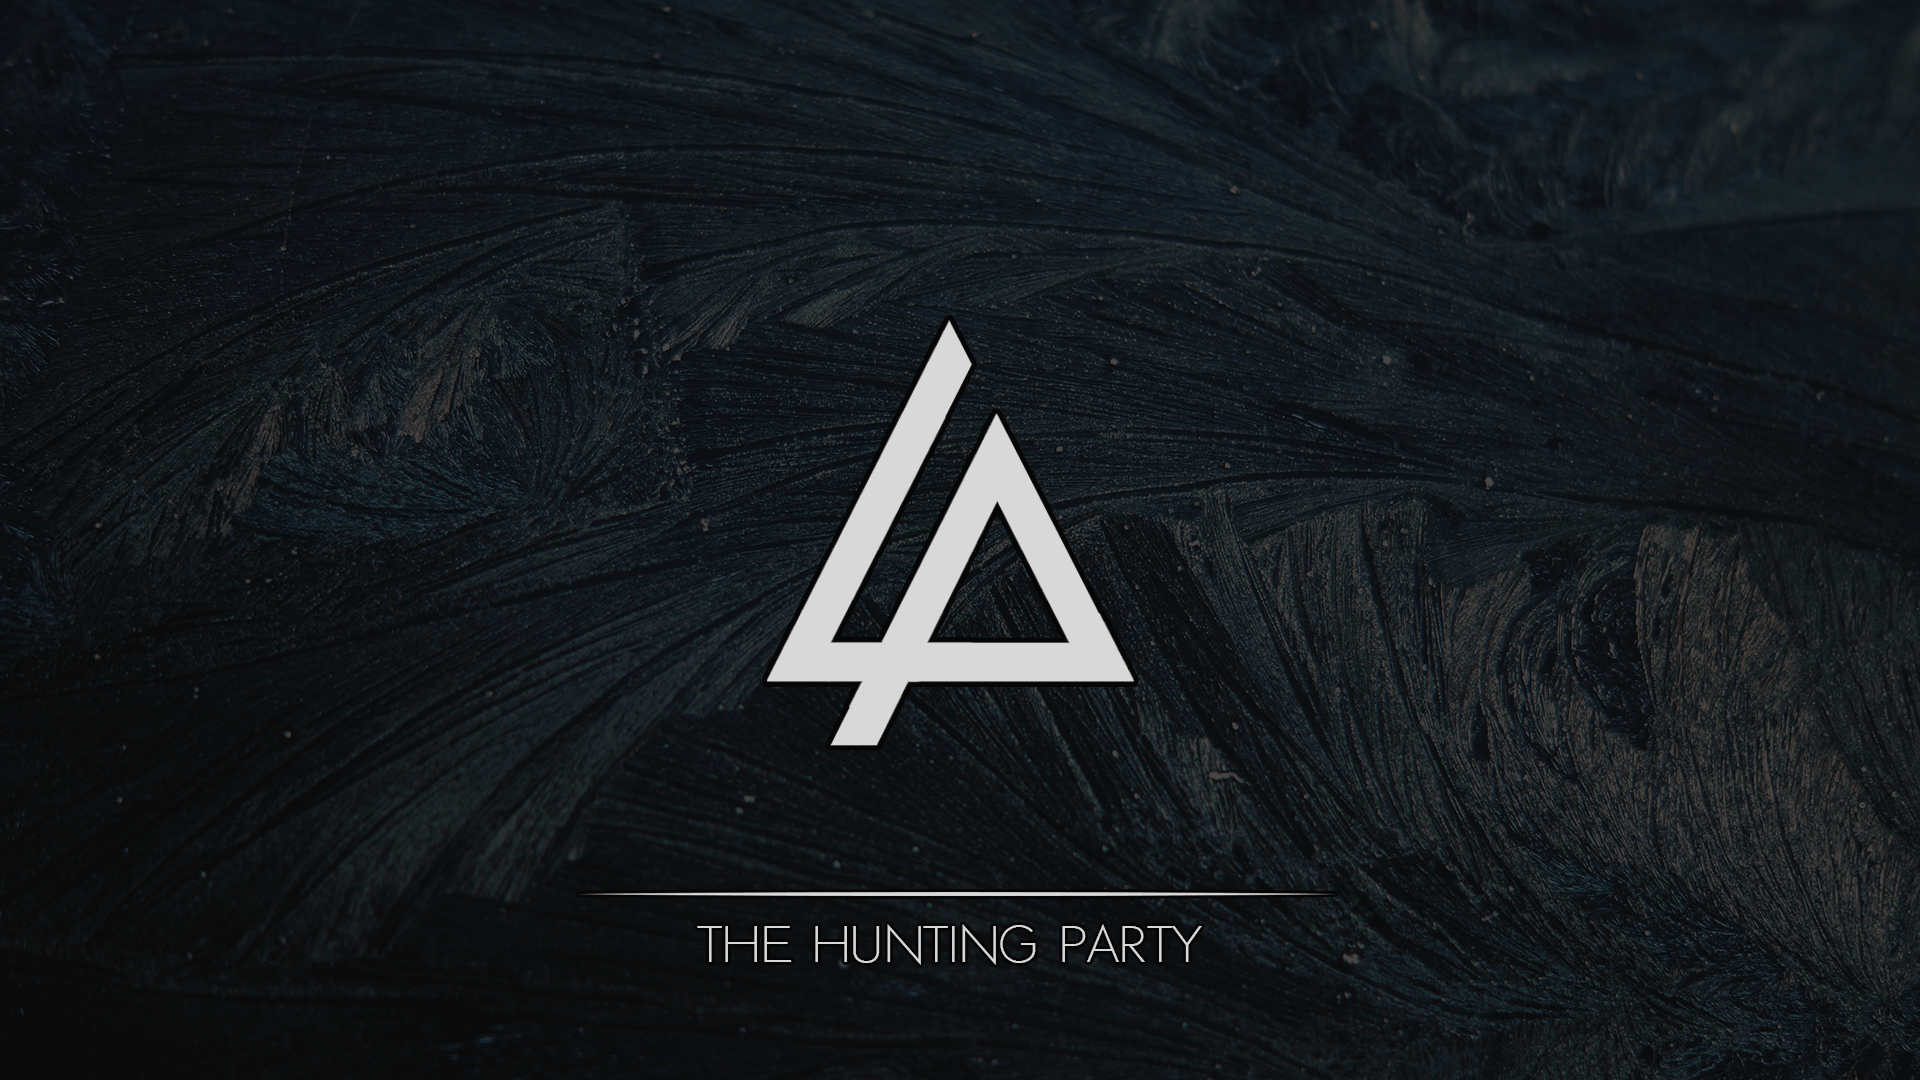 Linkin Park Wallpapers Top Free Linkin Park Backgrounds